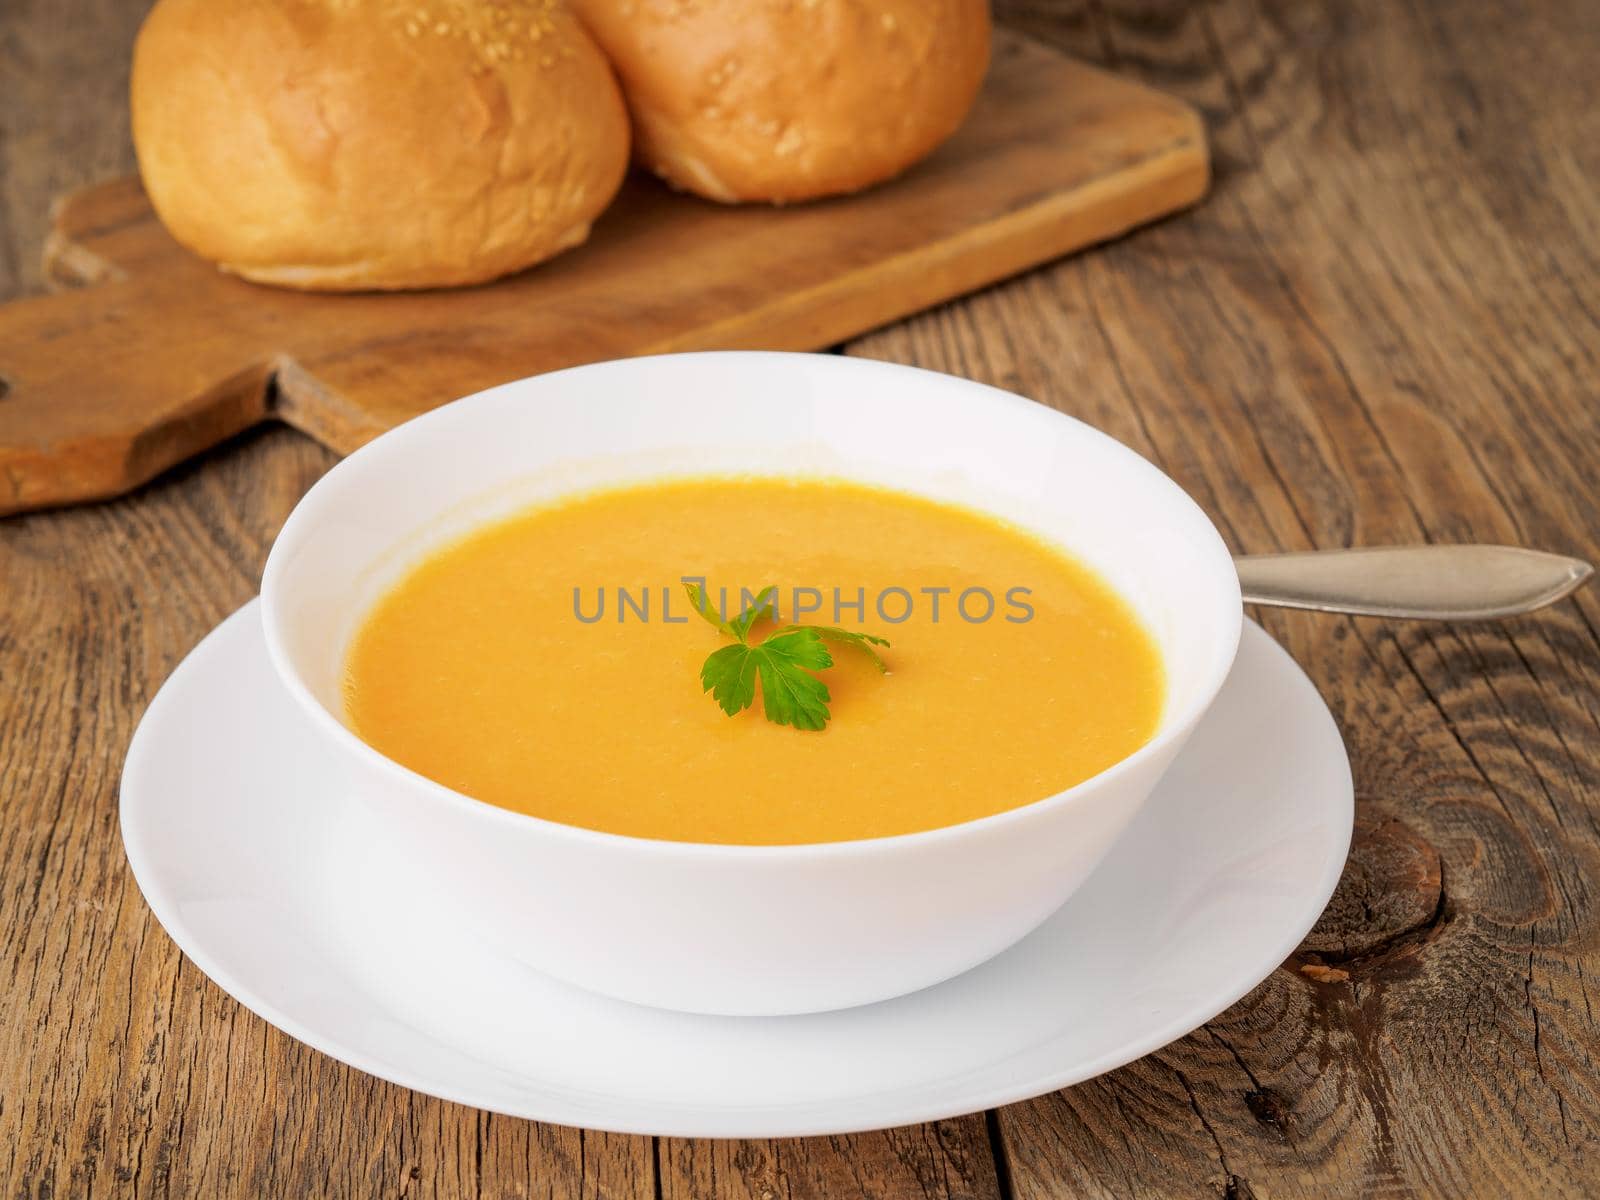 white bowl of pumpkin soup, garnished with parsley on wooden background, side view.